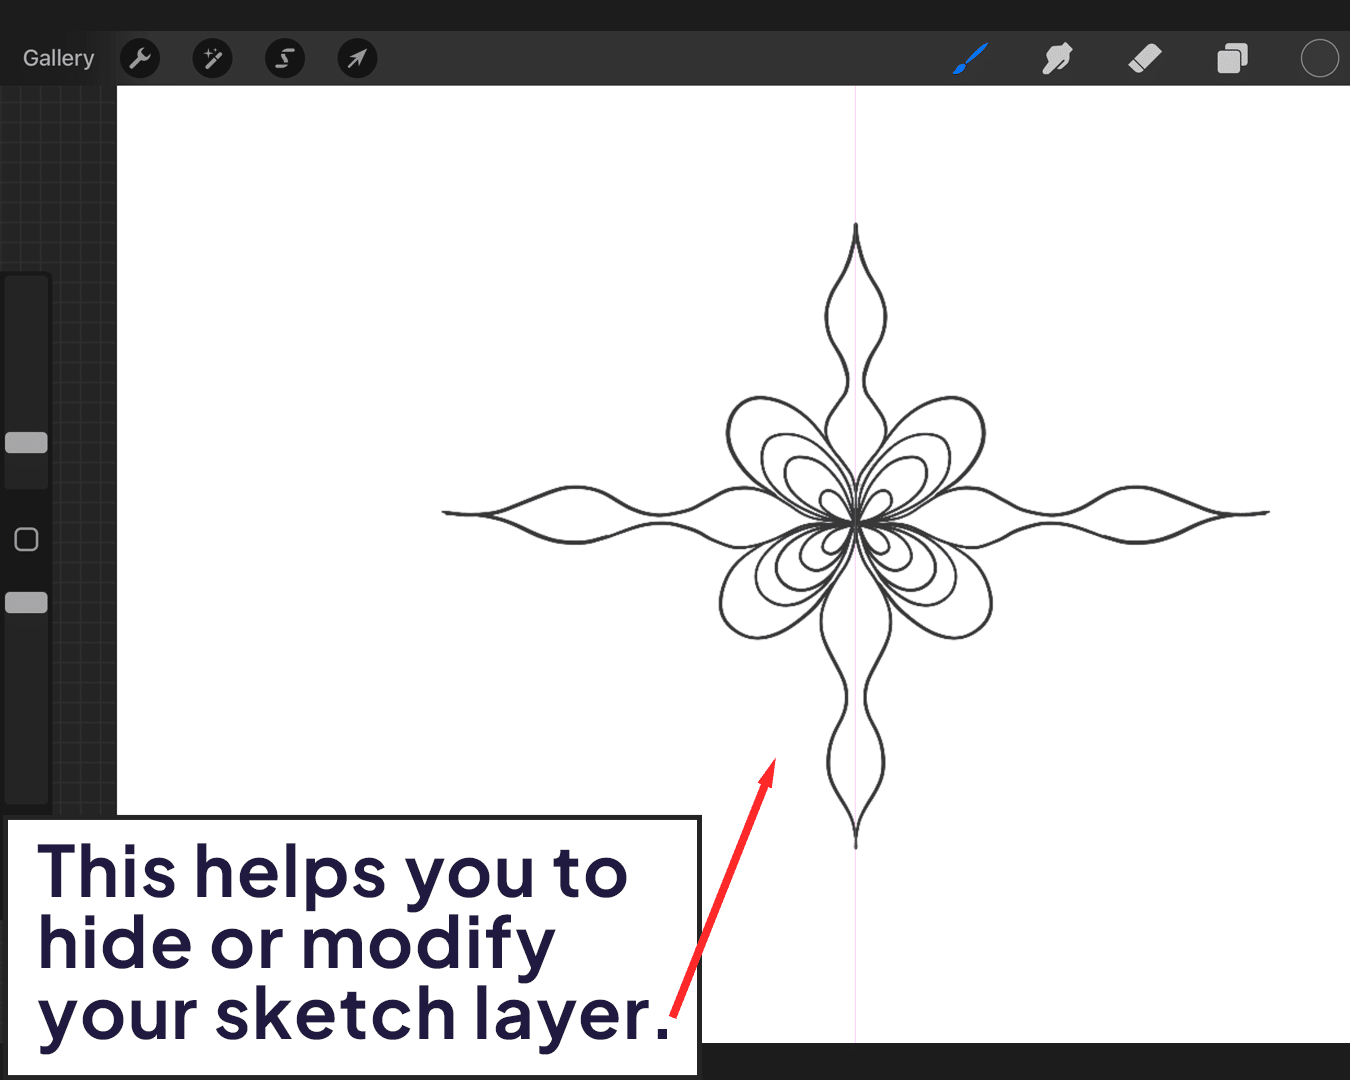 Hiding or modifying your sketch layer